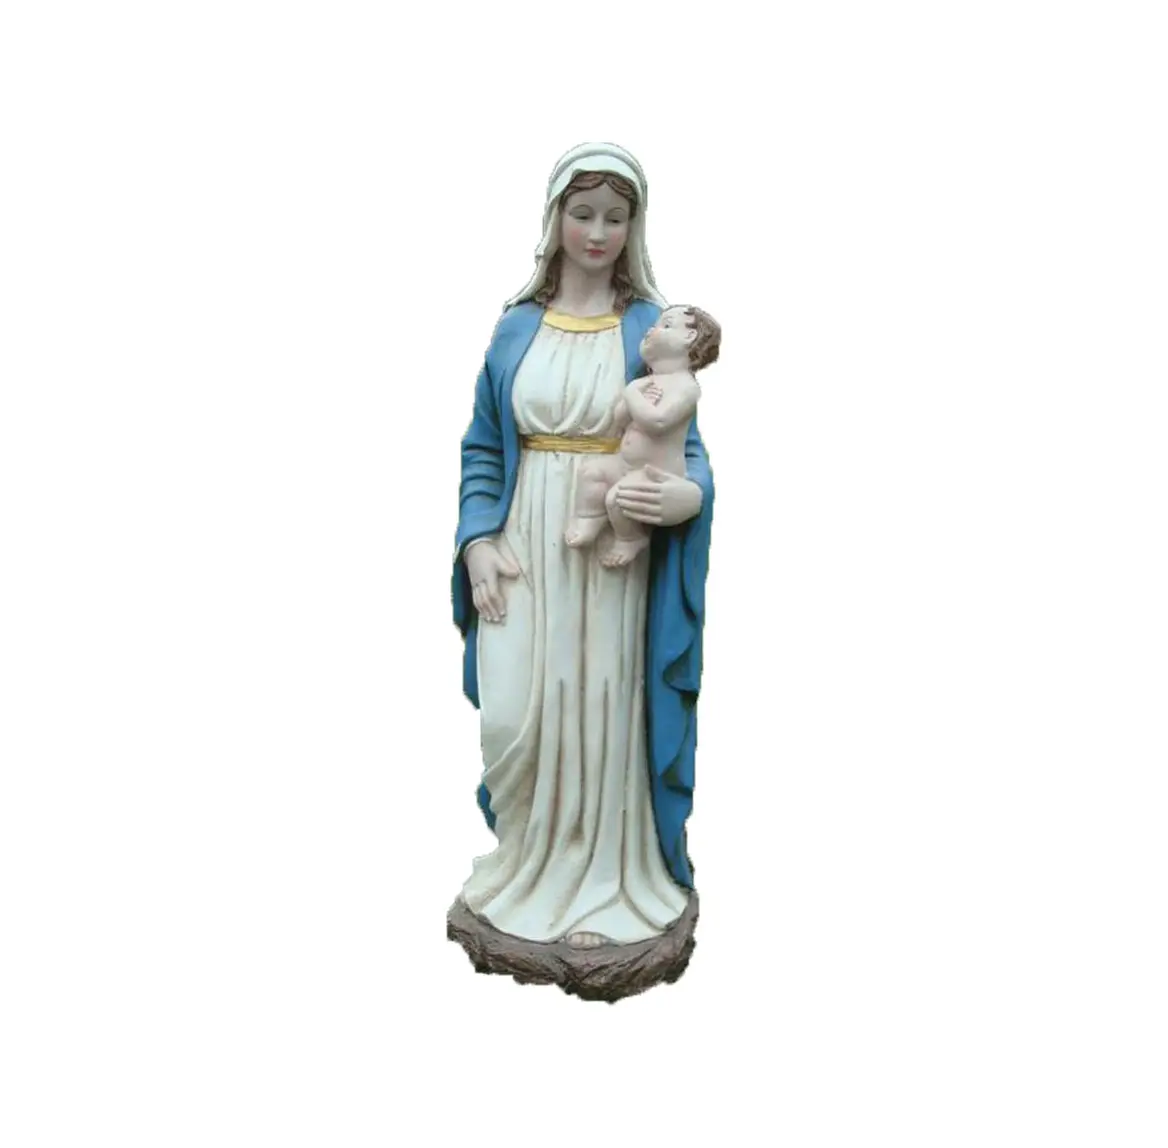 Customized Religious Statues Creative Virgin Mary Holding Baby Jesus Large Life-Size Christian Ornaments